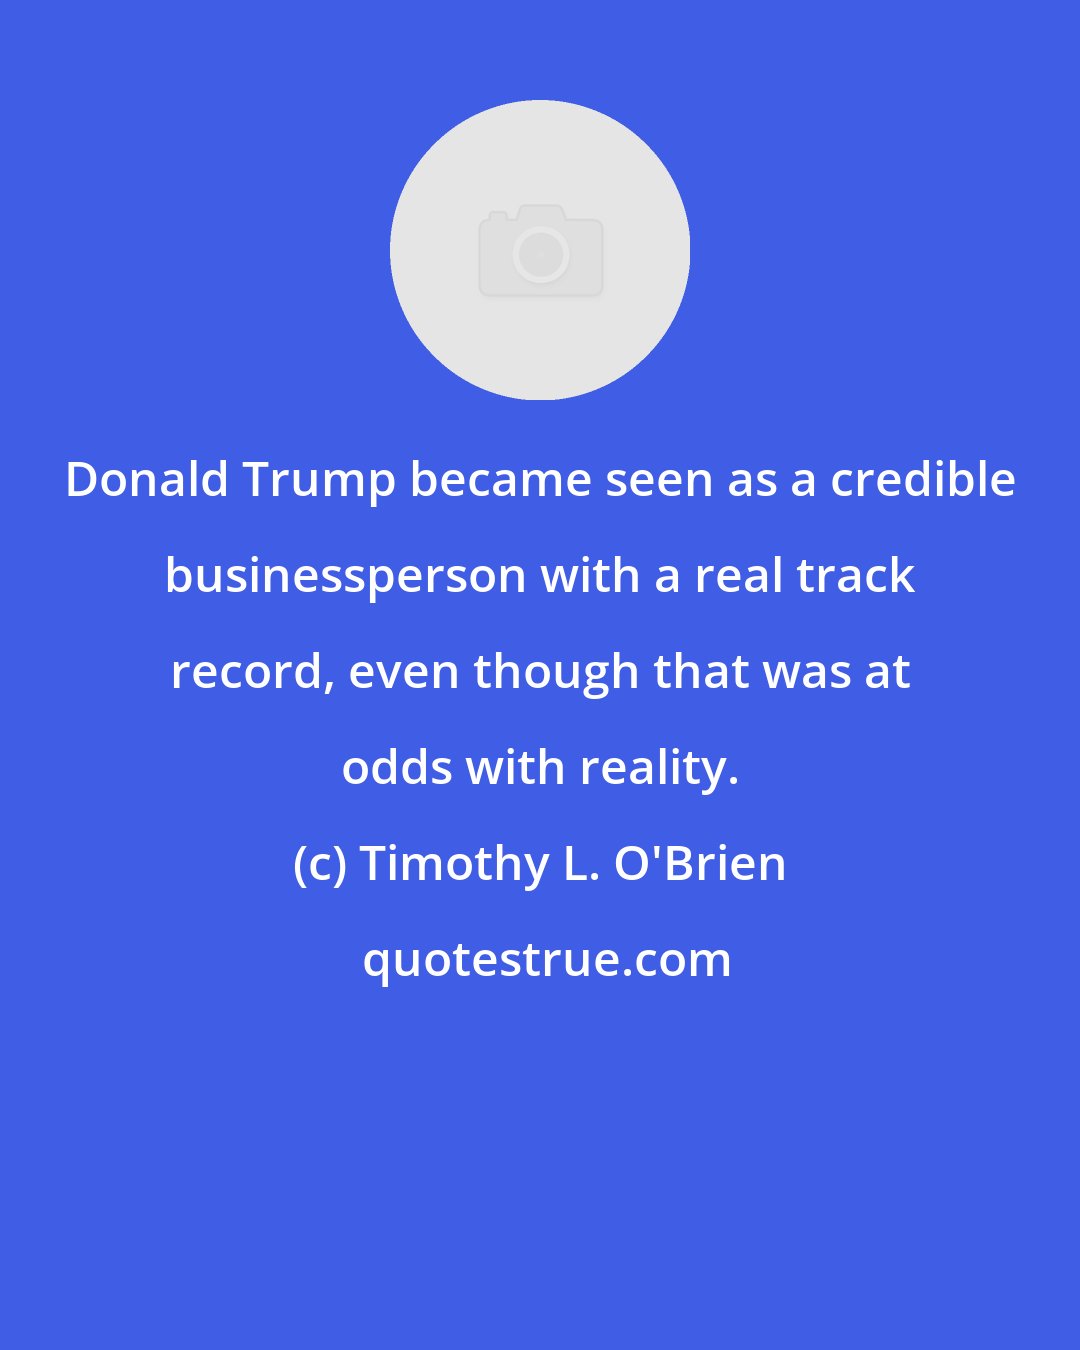 Timothy L. O'Brien: Donald Trump became seen as a credible businessperson with a real track record, even though that was at odds with reality.